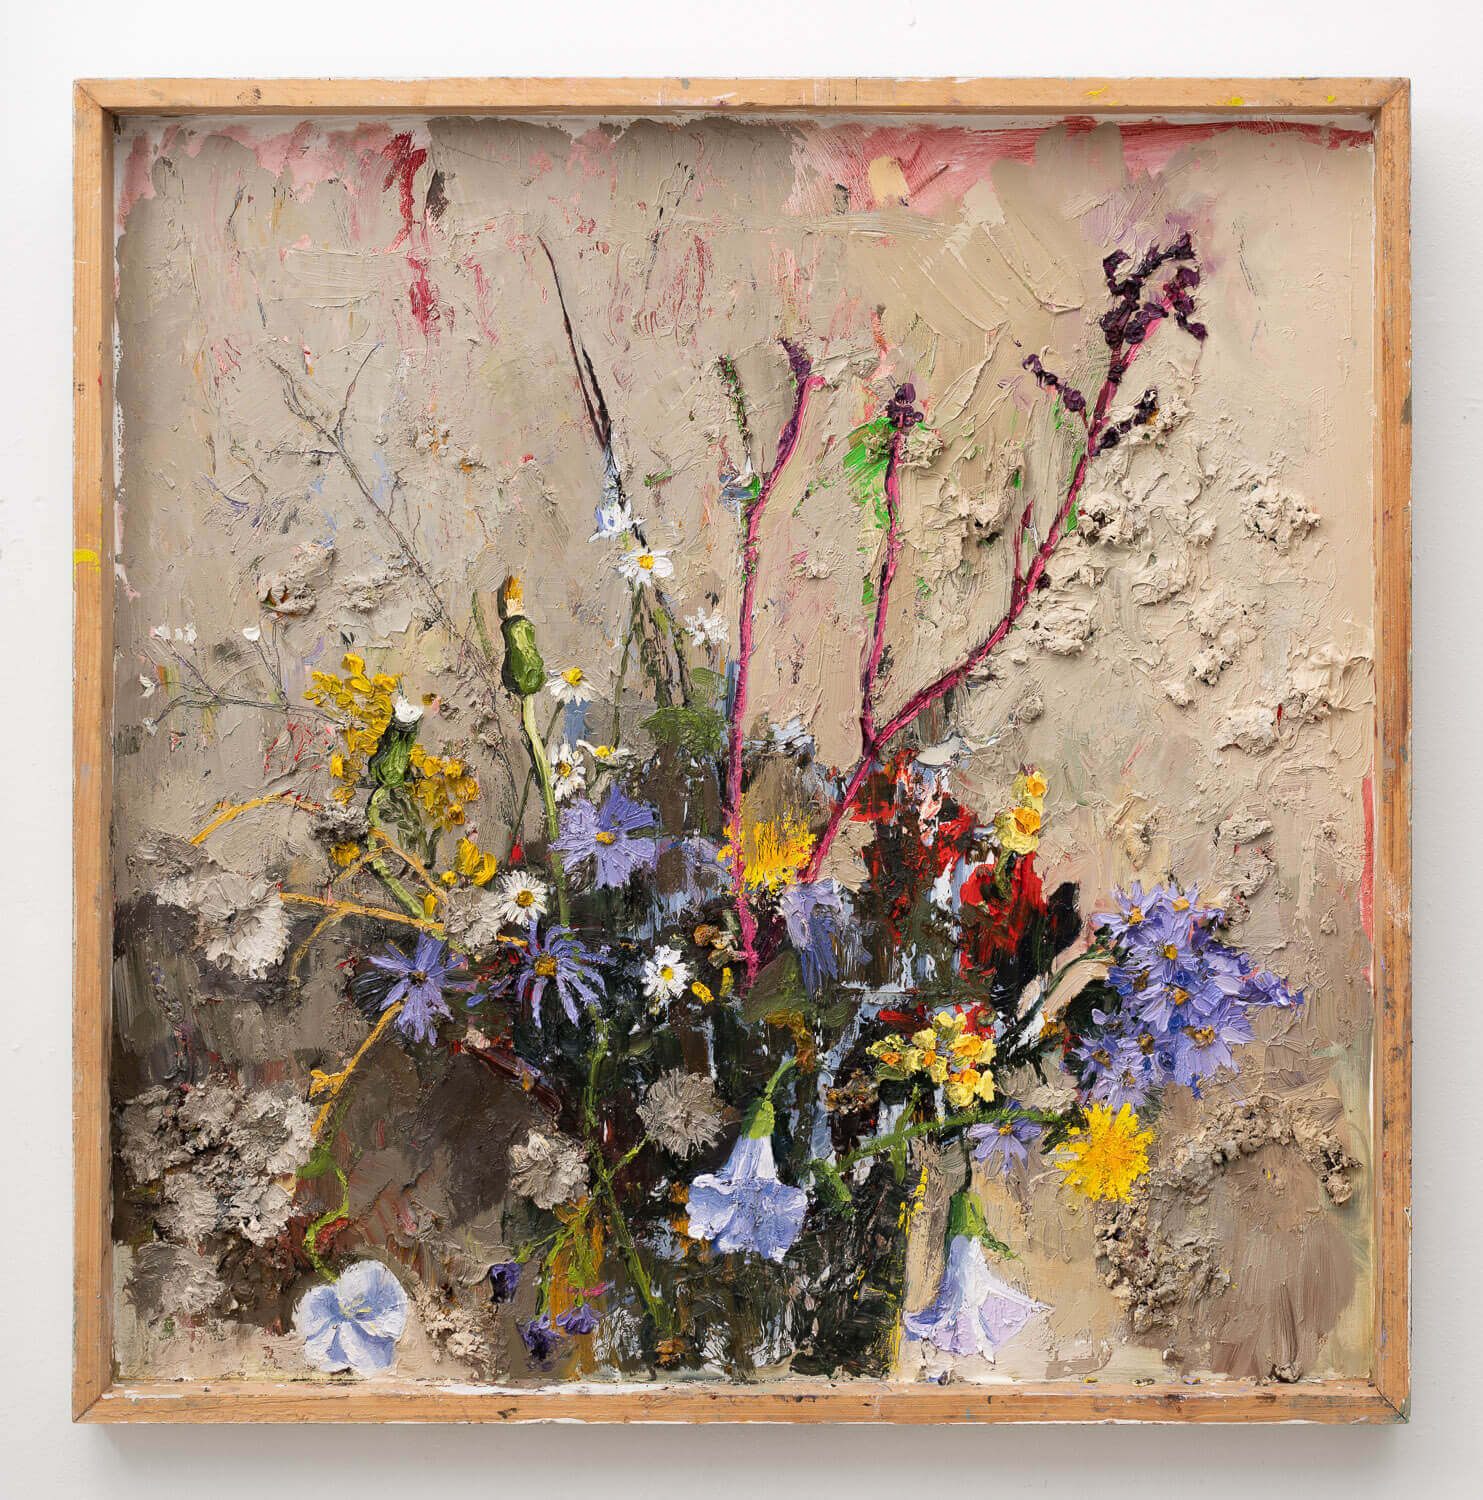 Avital Burg, Late fall flowers 2020, oil on wood, 30 x 30 inches (courtesy of the artist)